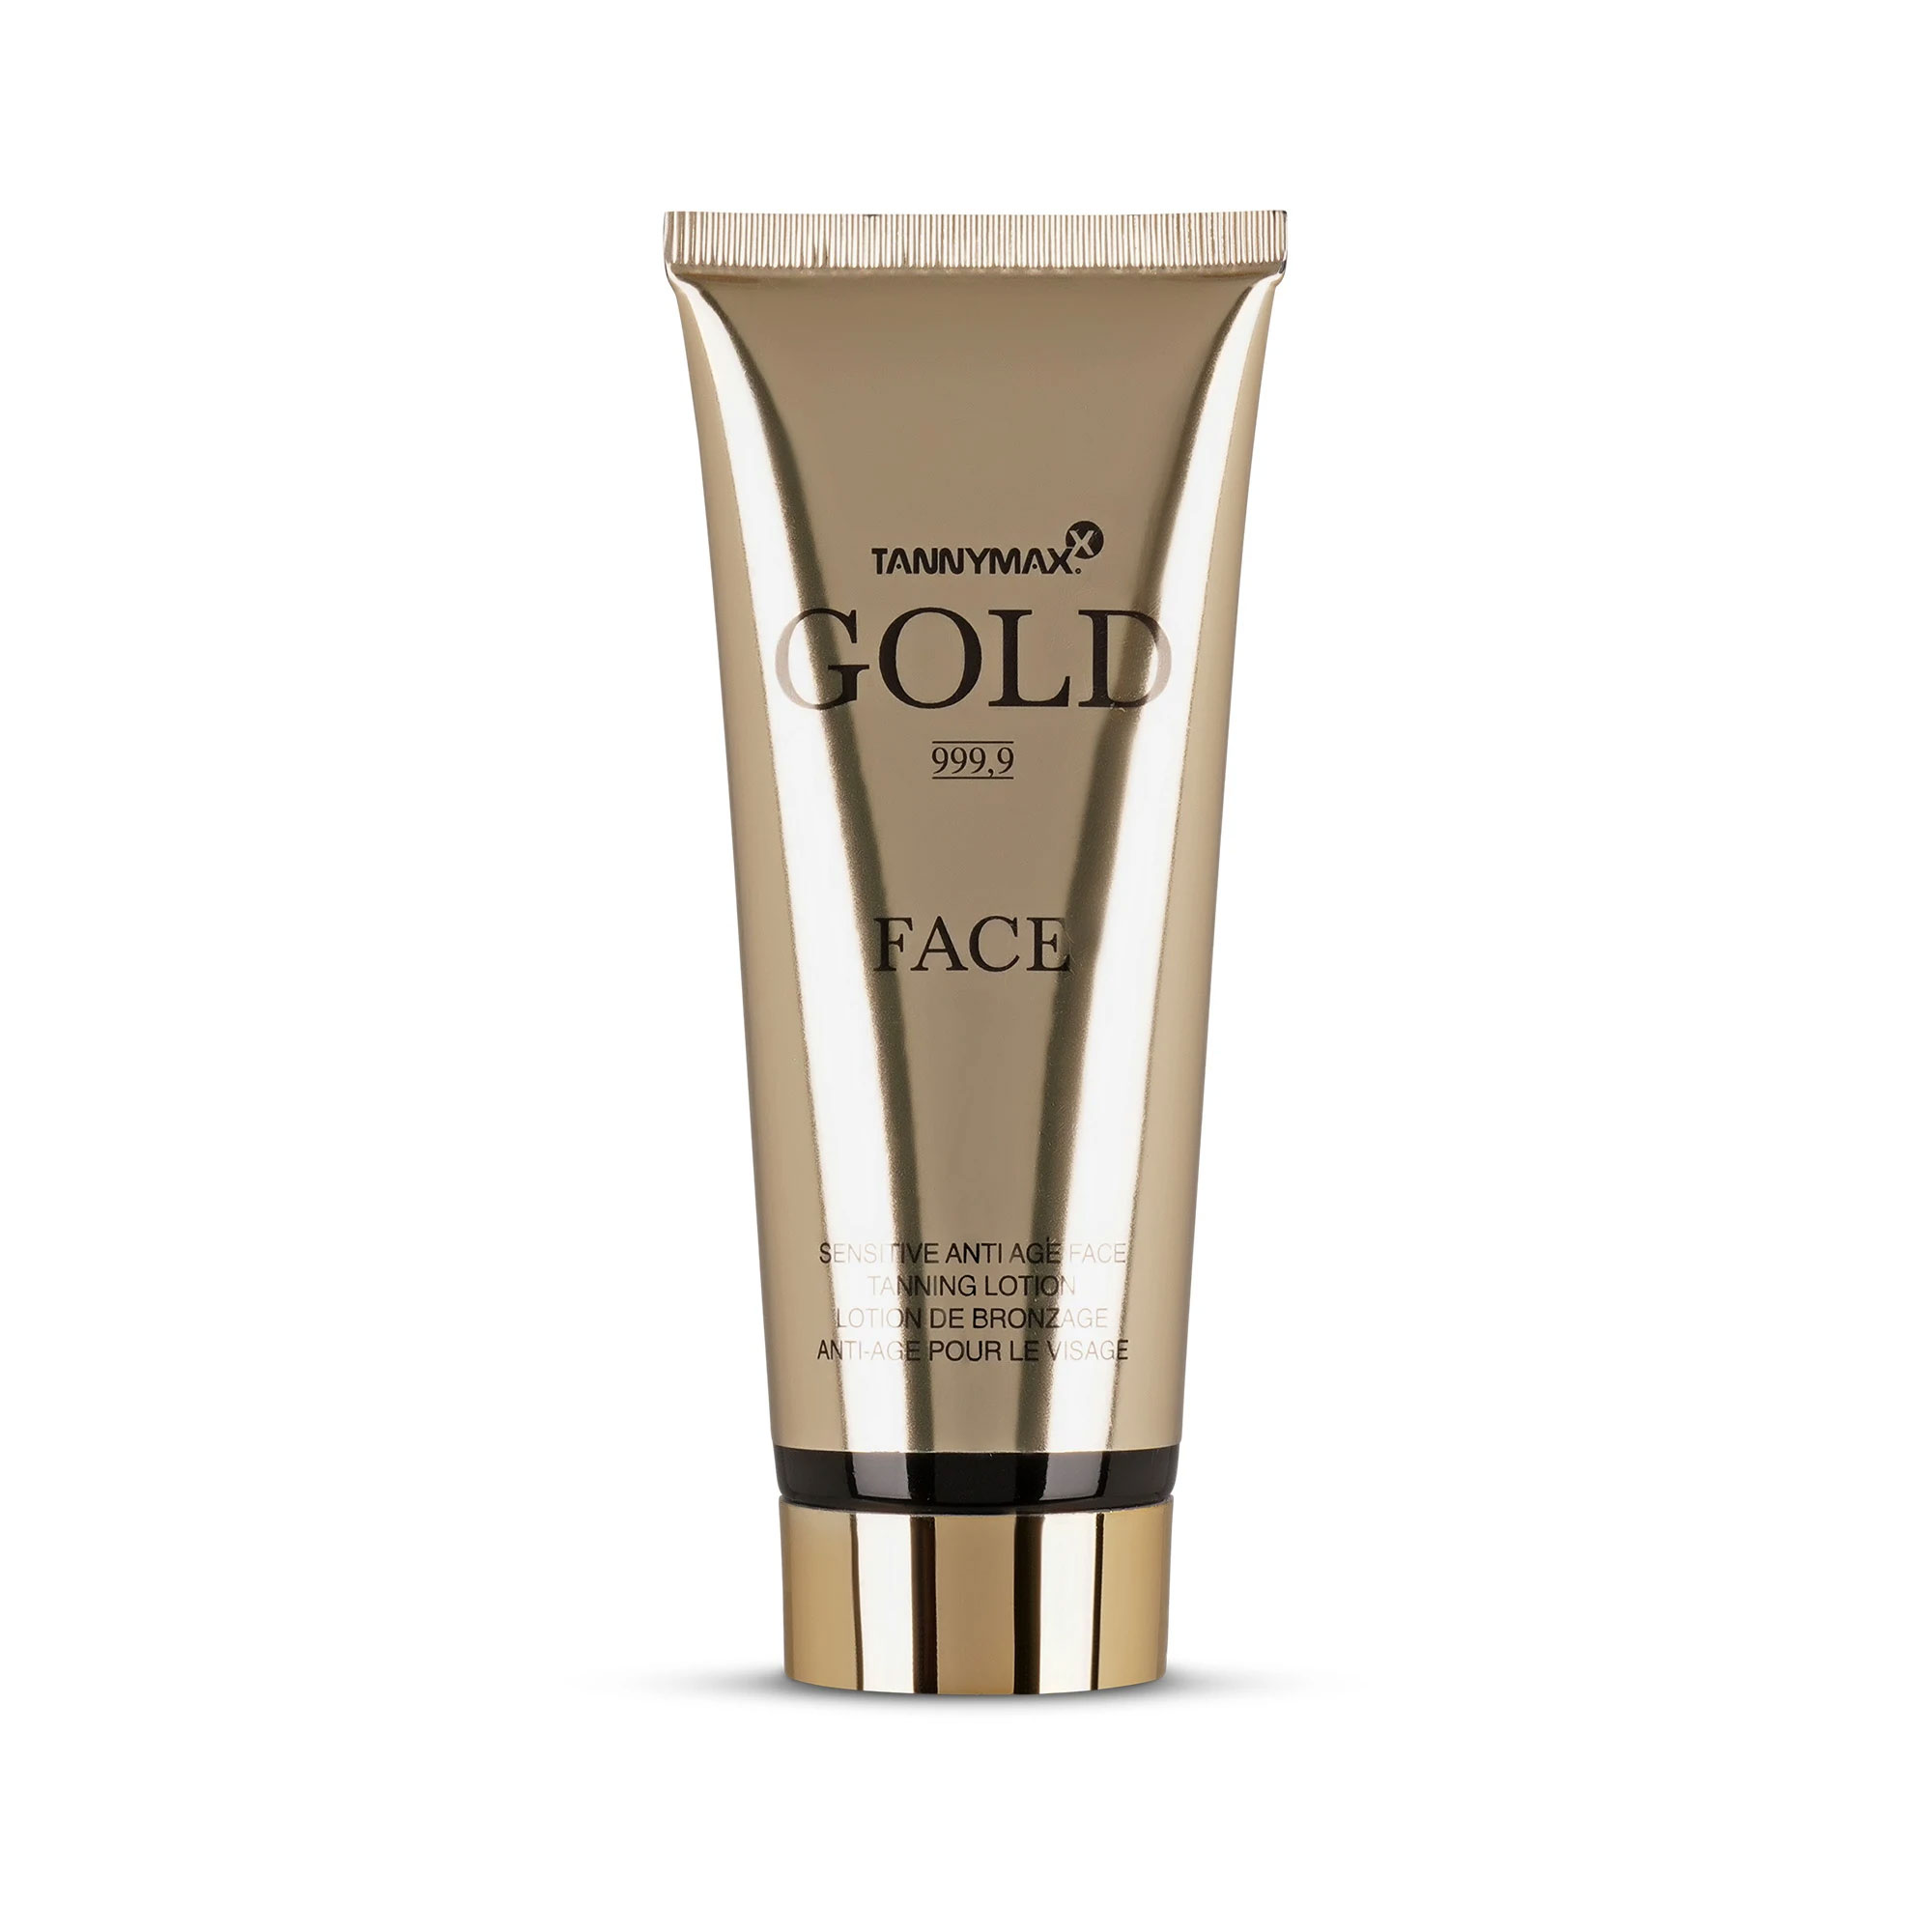 Tannymaxx Gold Ultra Sensitive Face Care Lotion 0523010000 width=